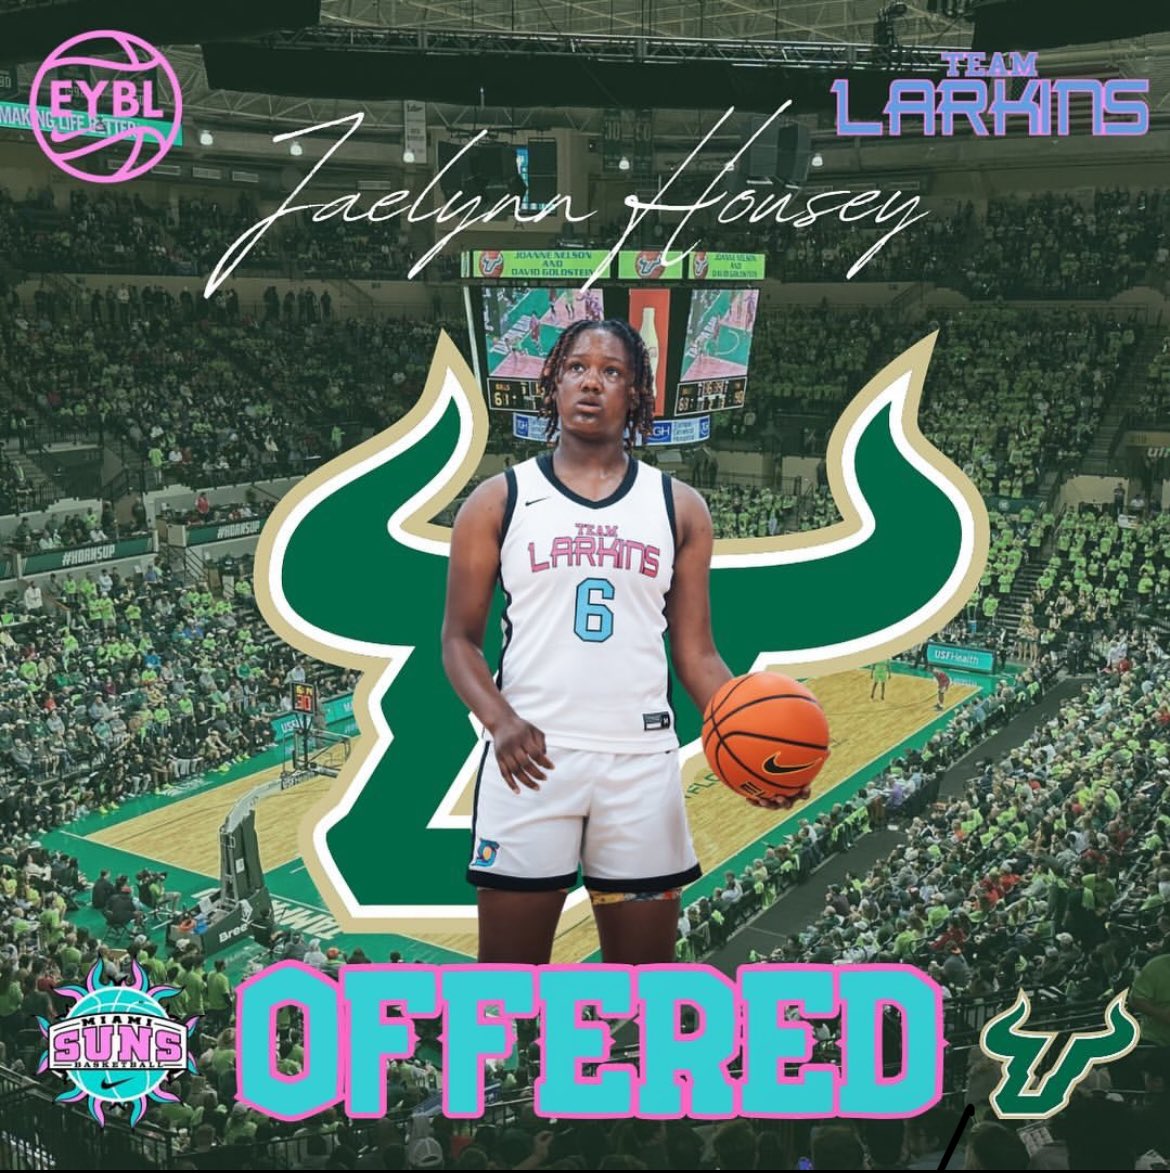 Blessed to receive an offer from @CoachJFernandez and @USFWBB. Thank you!!